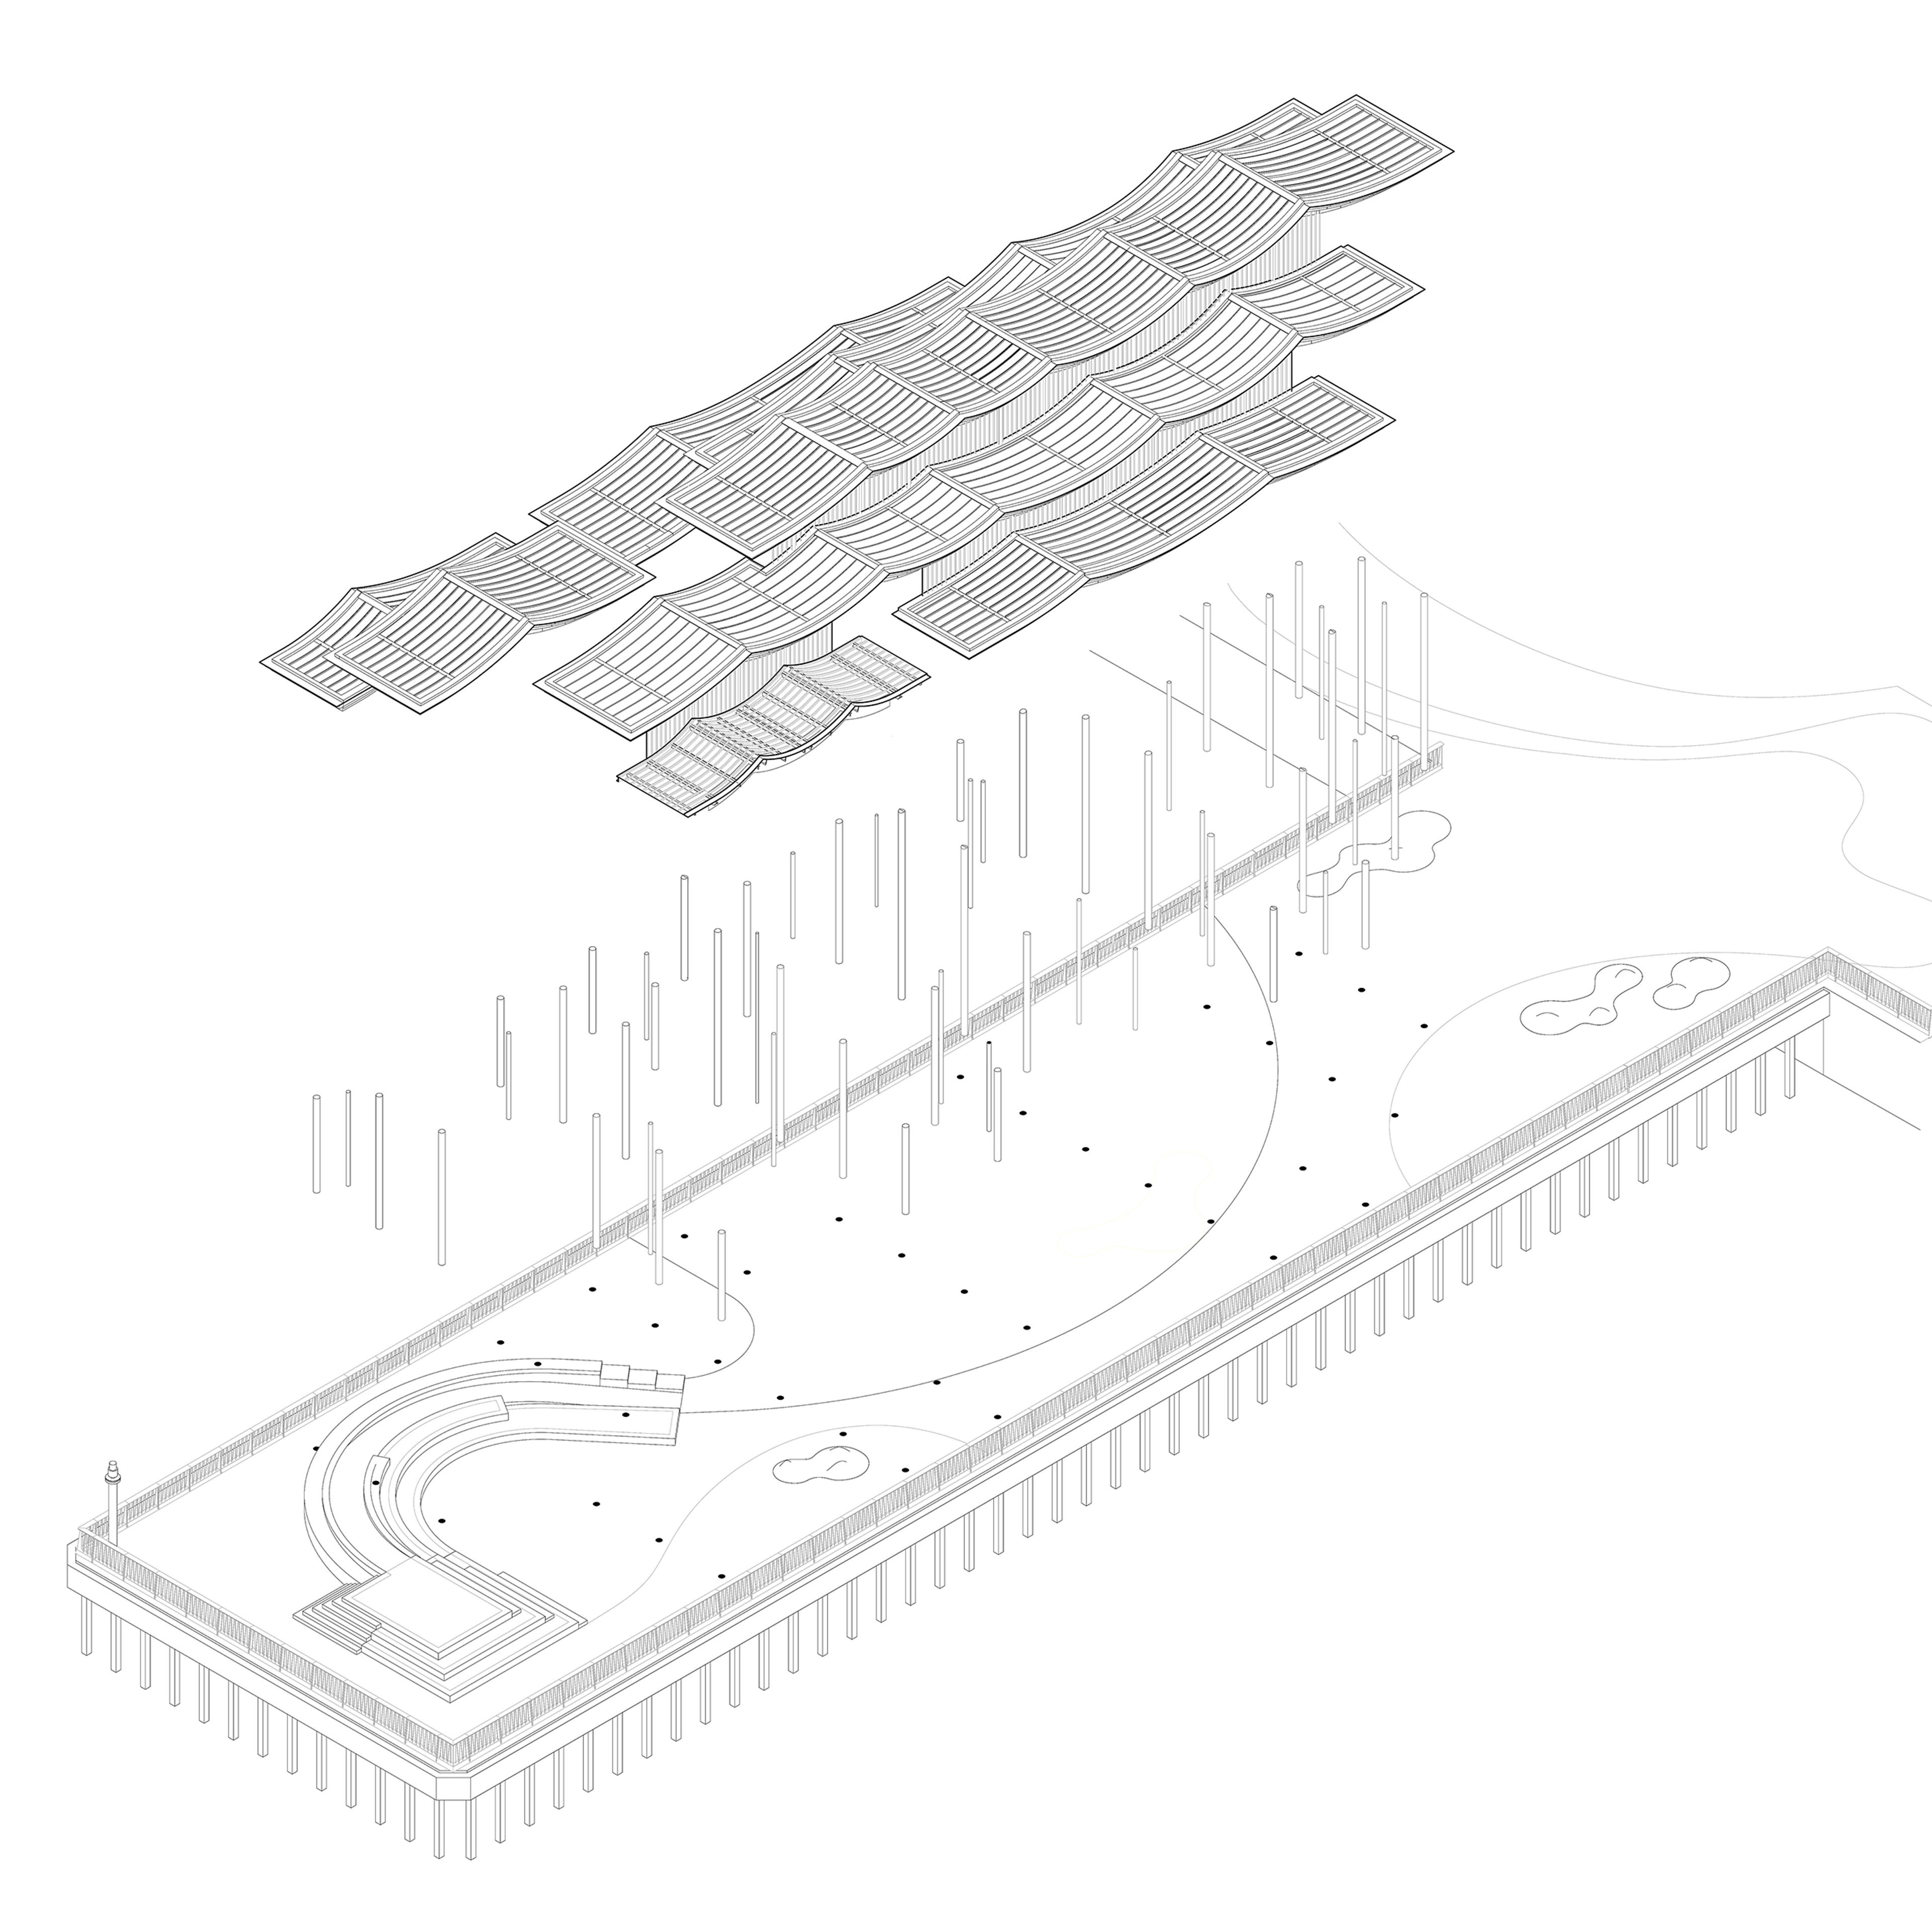 Exploded axonometric drawing of a pier re-development